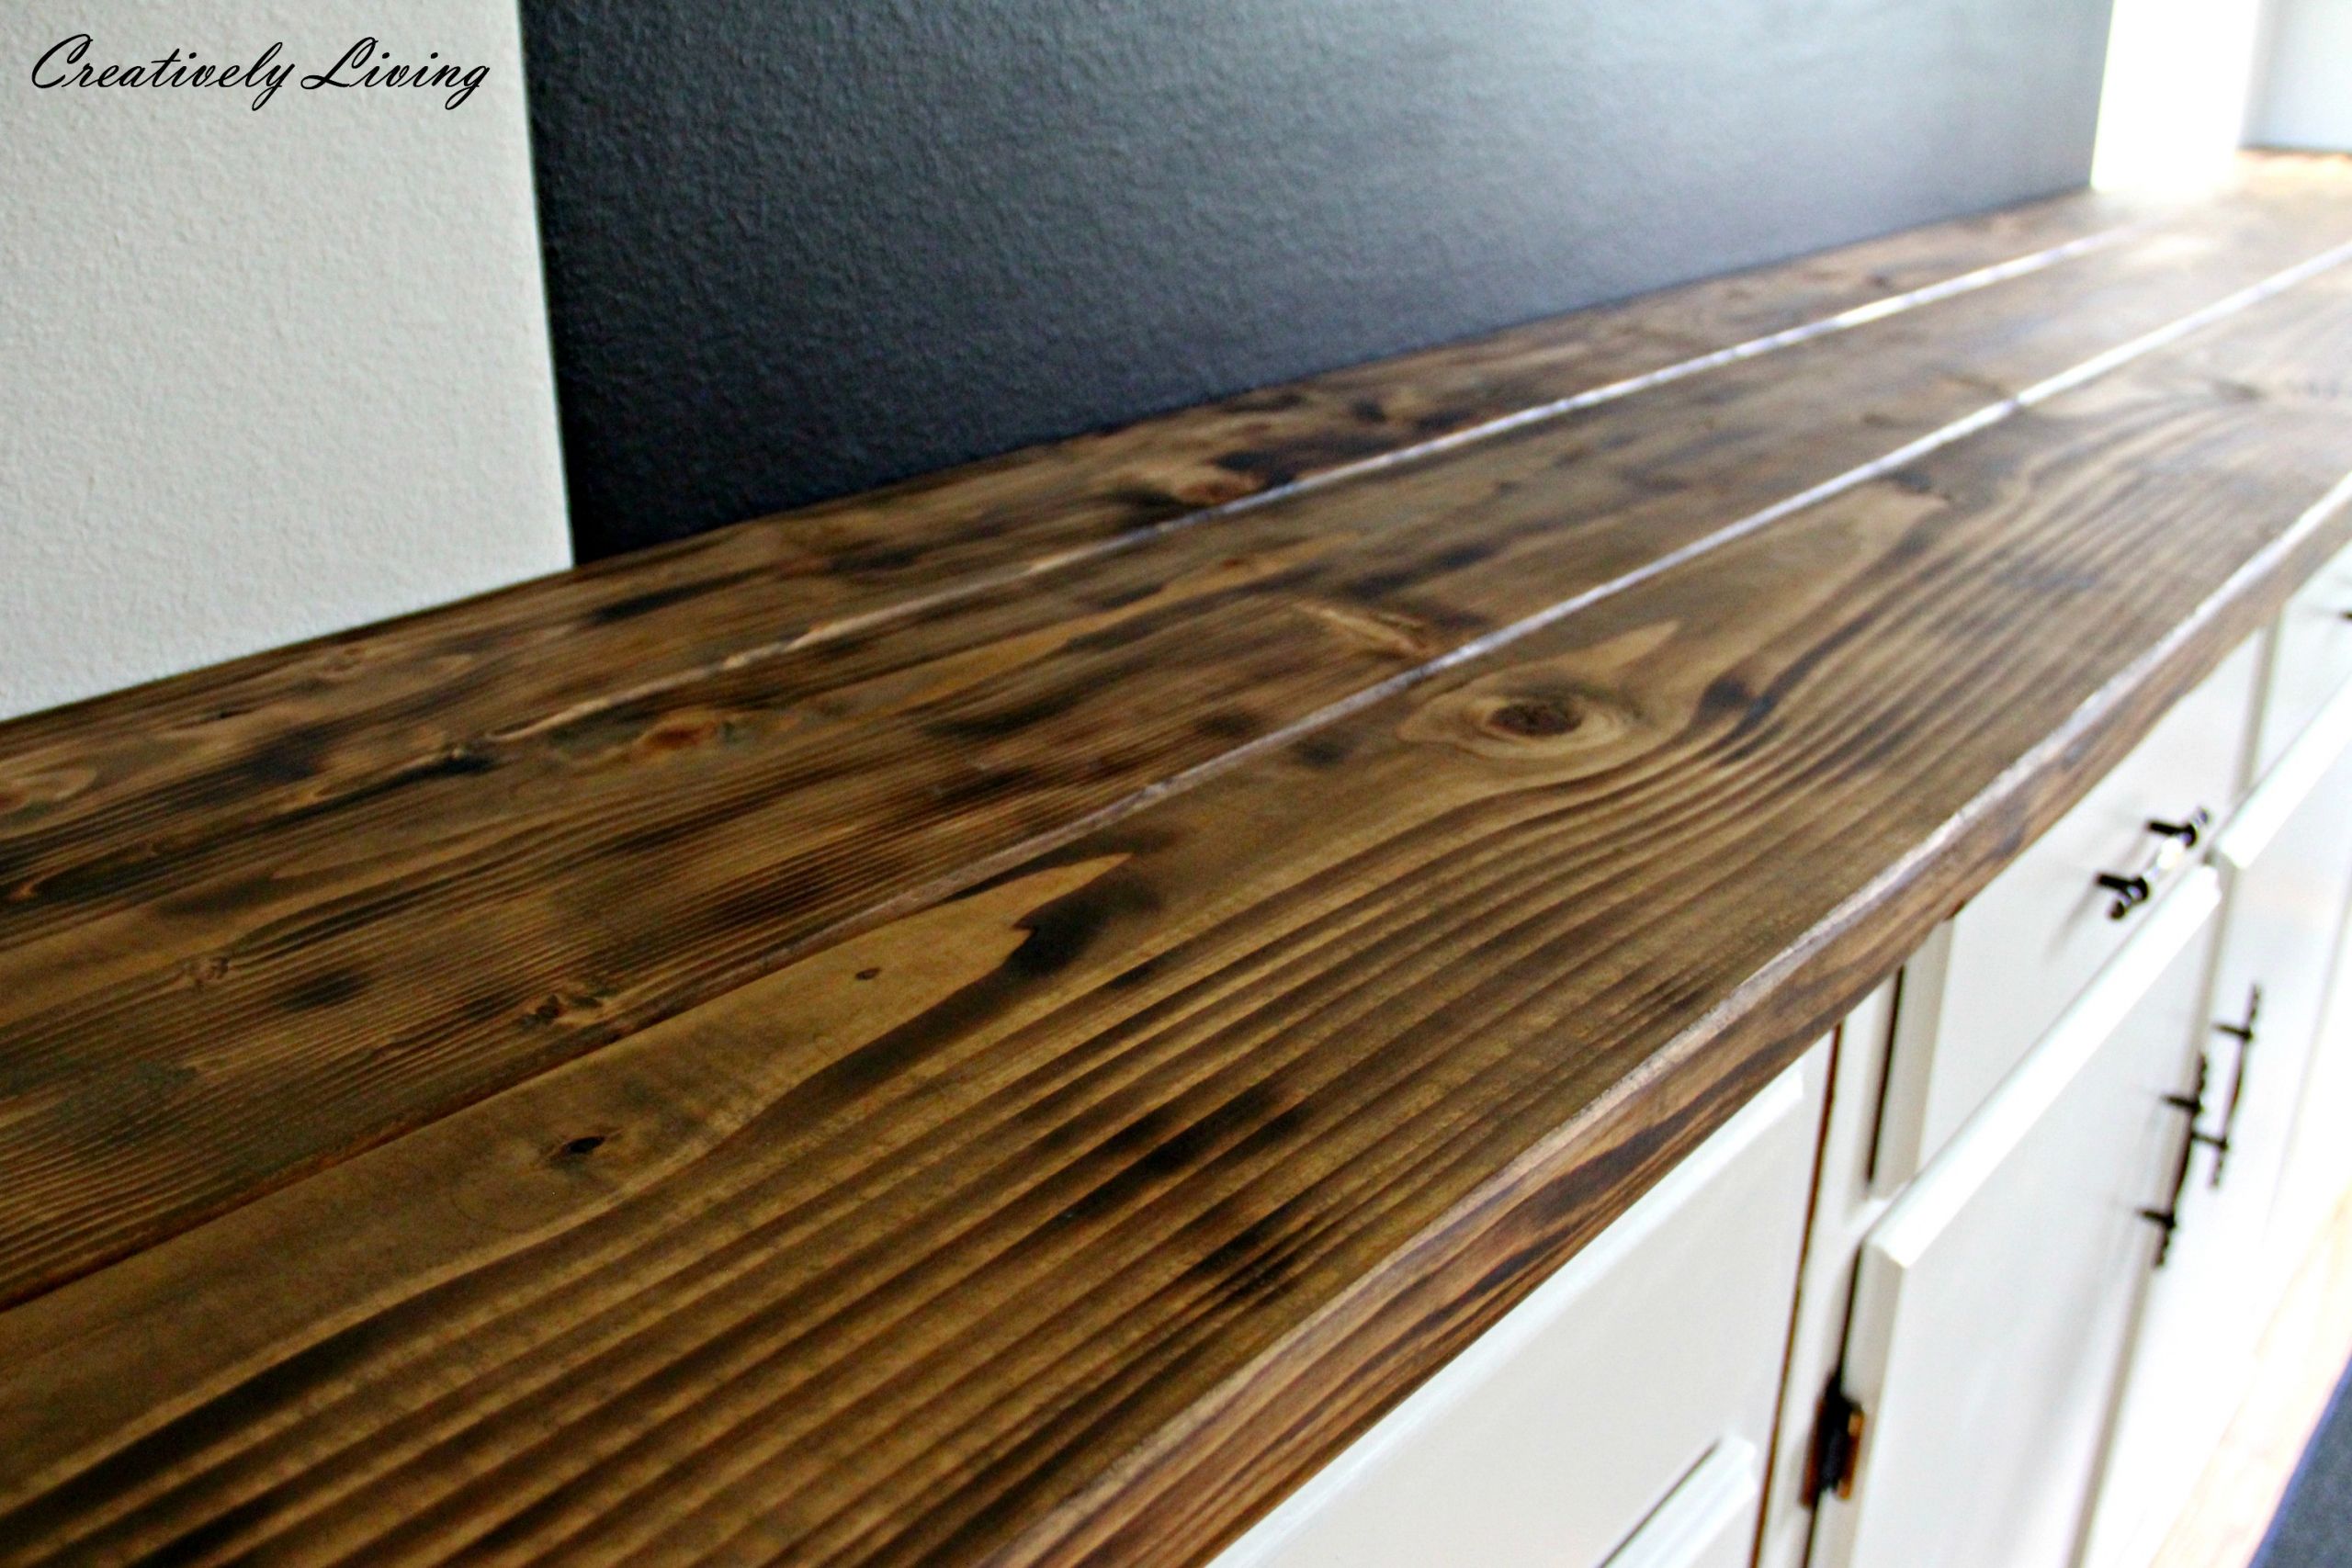 Wood Countertops DIY
 Torched DIY Rustic Wood Counter Top for Under $50 by